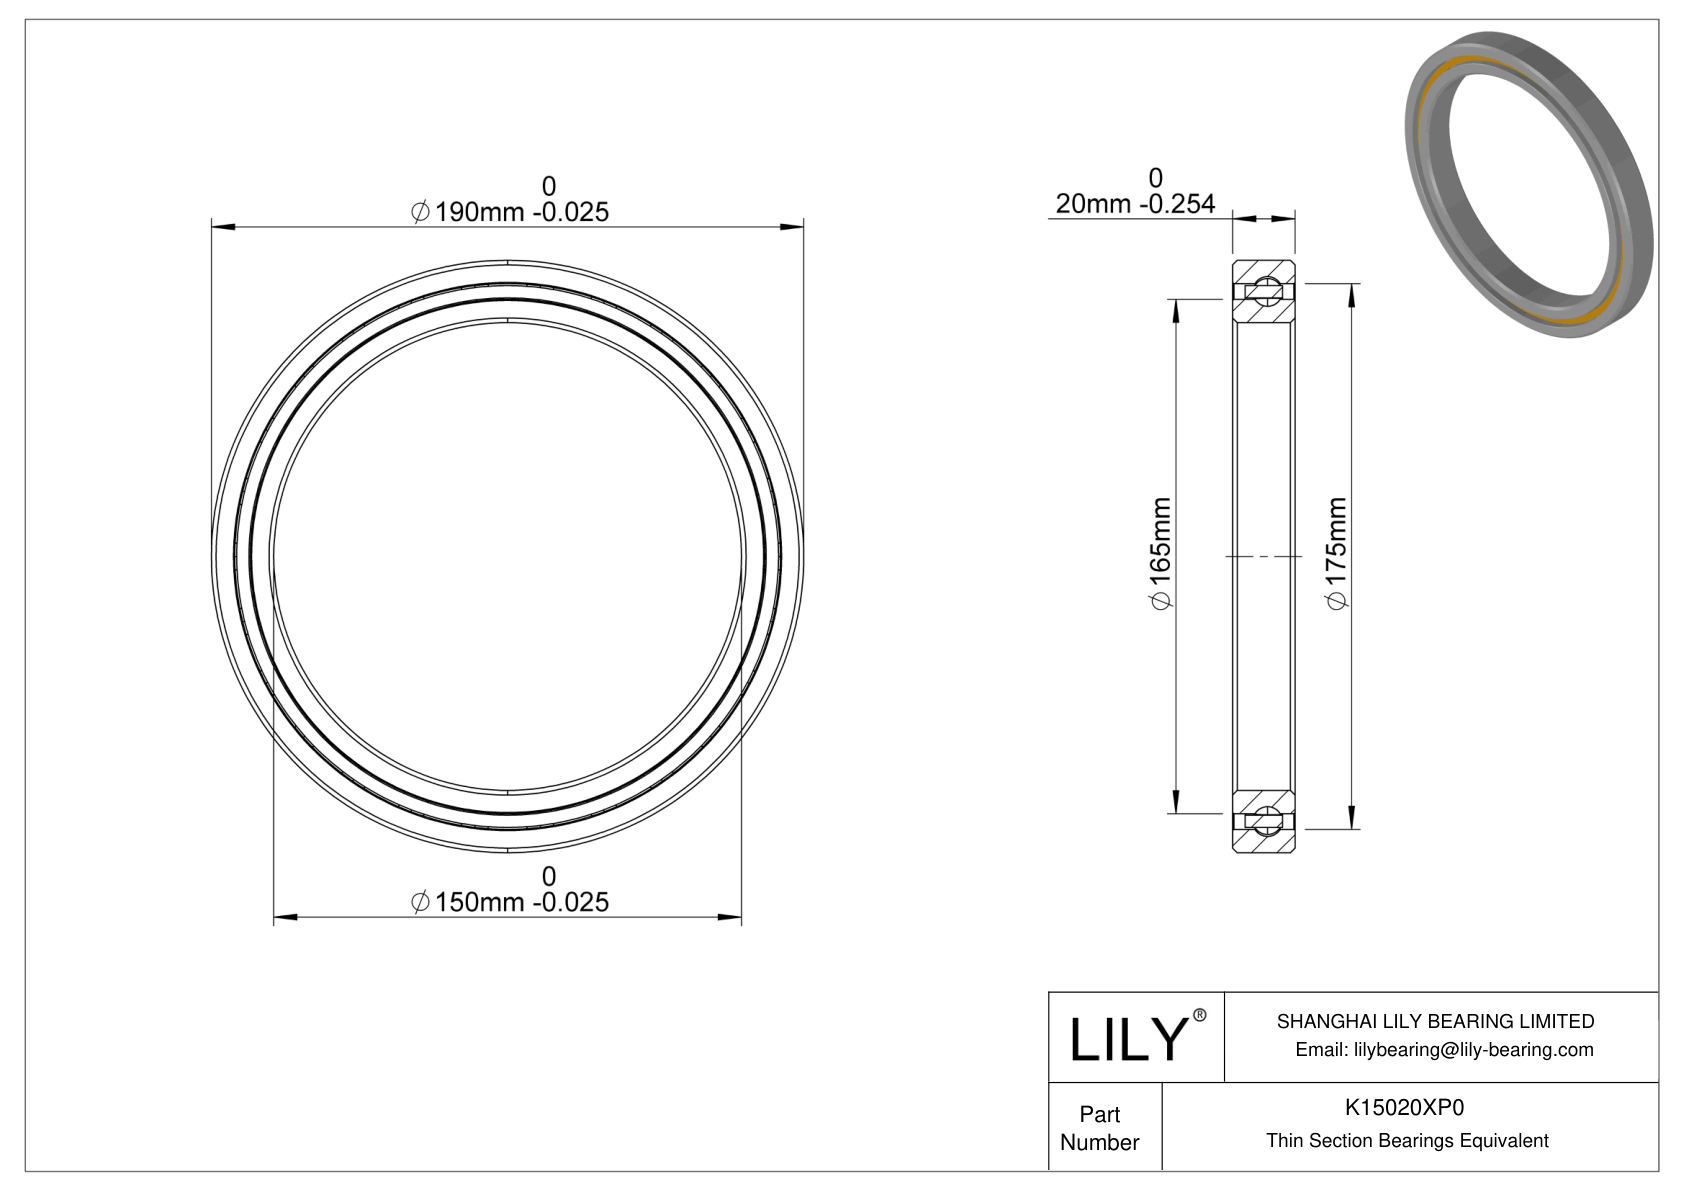 K15020XP0 Constant Section (CS) Bearings cad drawing